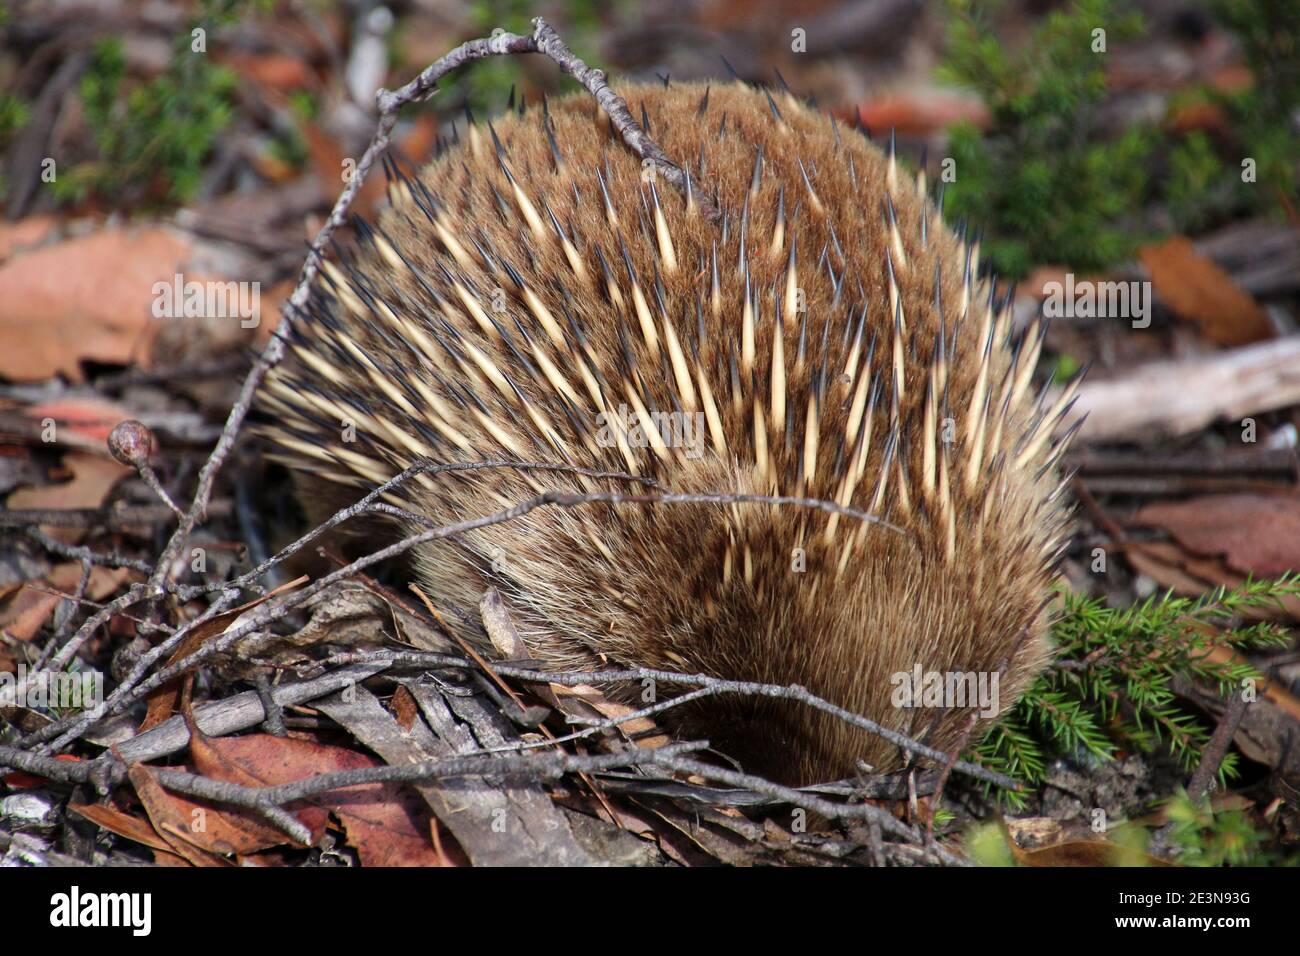 Echidna Egg High Resolution Stock Photography and Images - Alamy